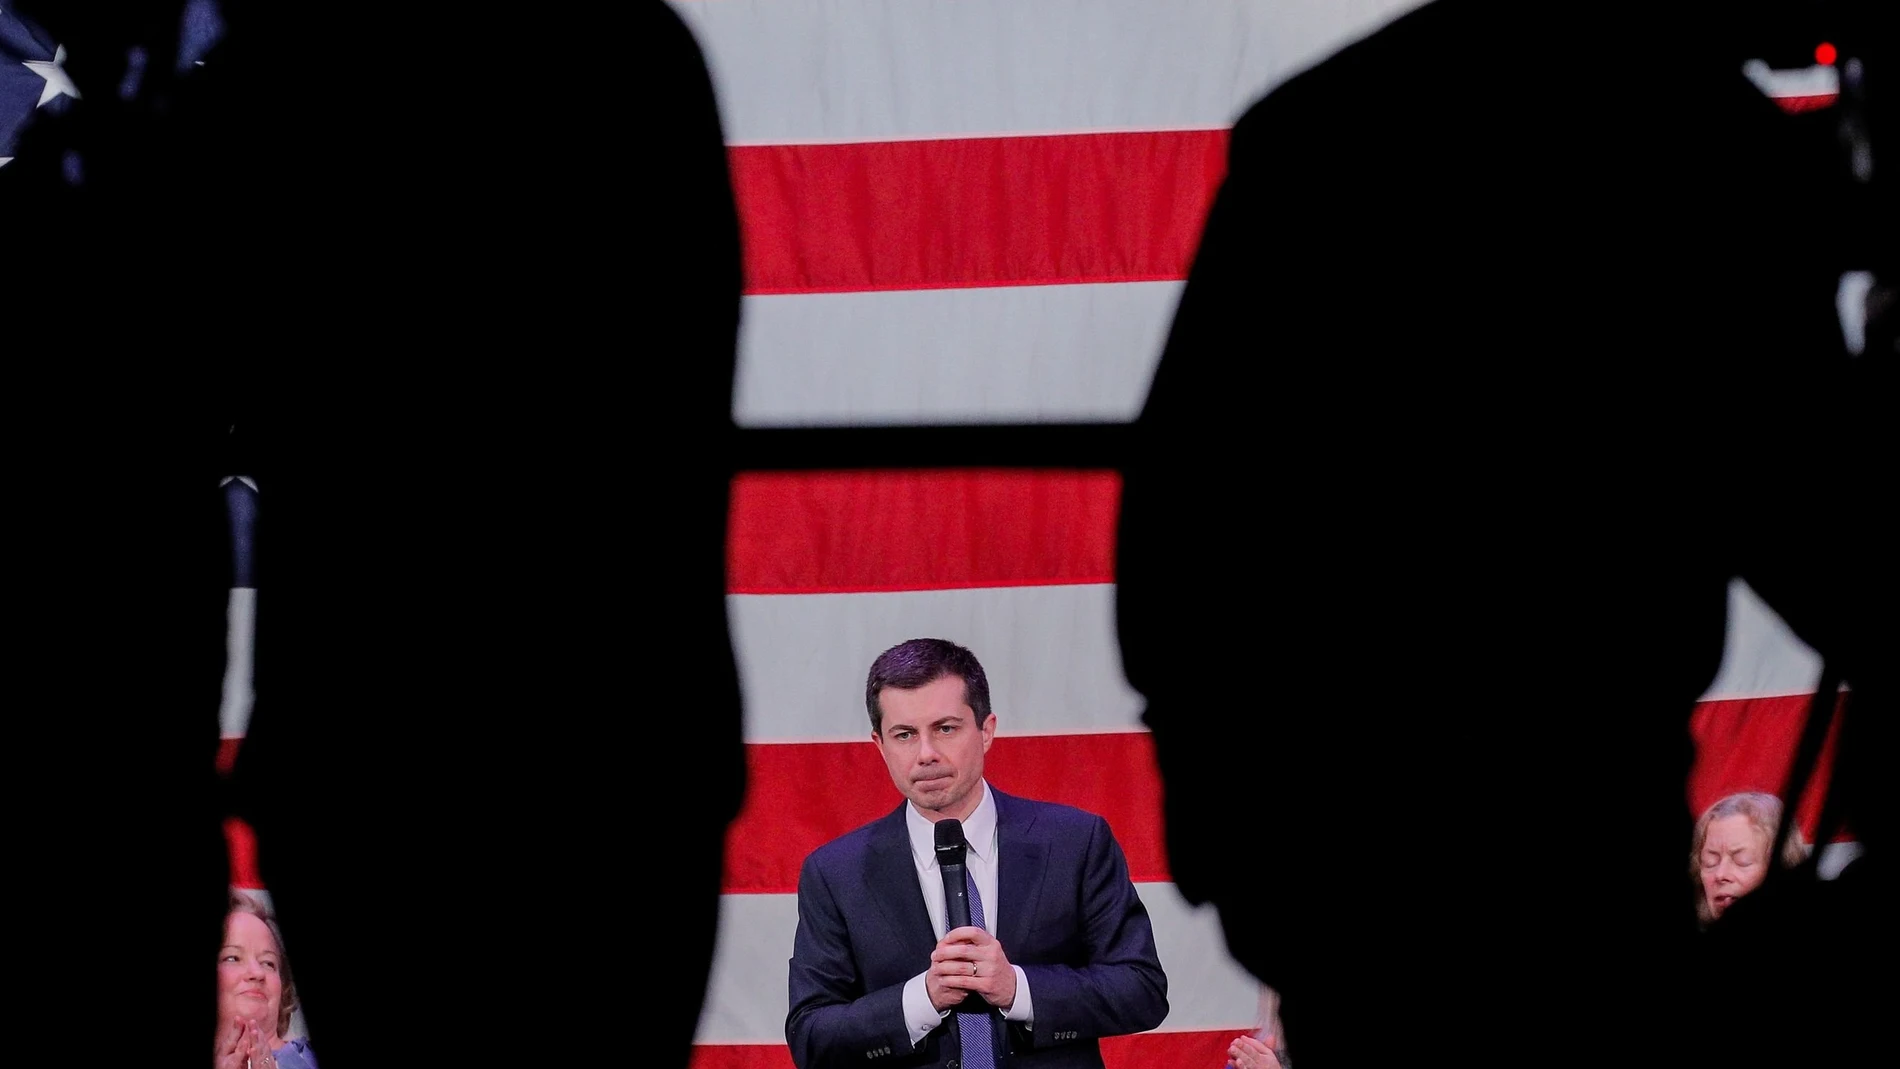 Democratic presidential candidate and former South Bend, Indiana mayor Pete Buttigieg, speaks during a campaign event in Concord, New Hampshire